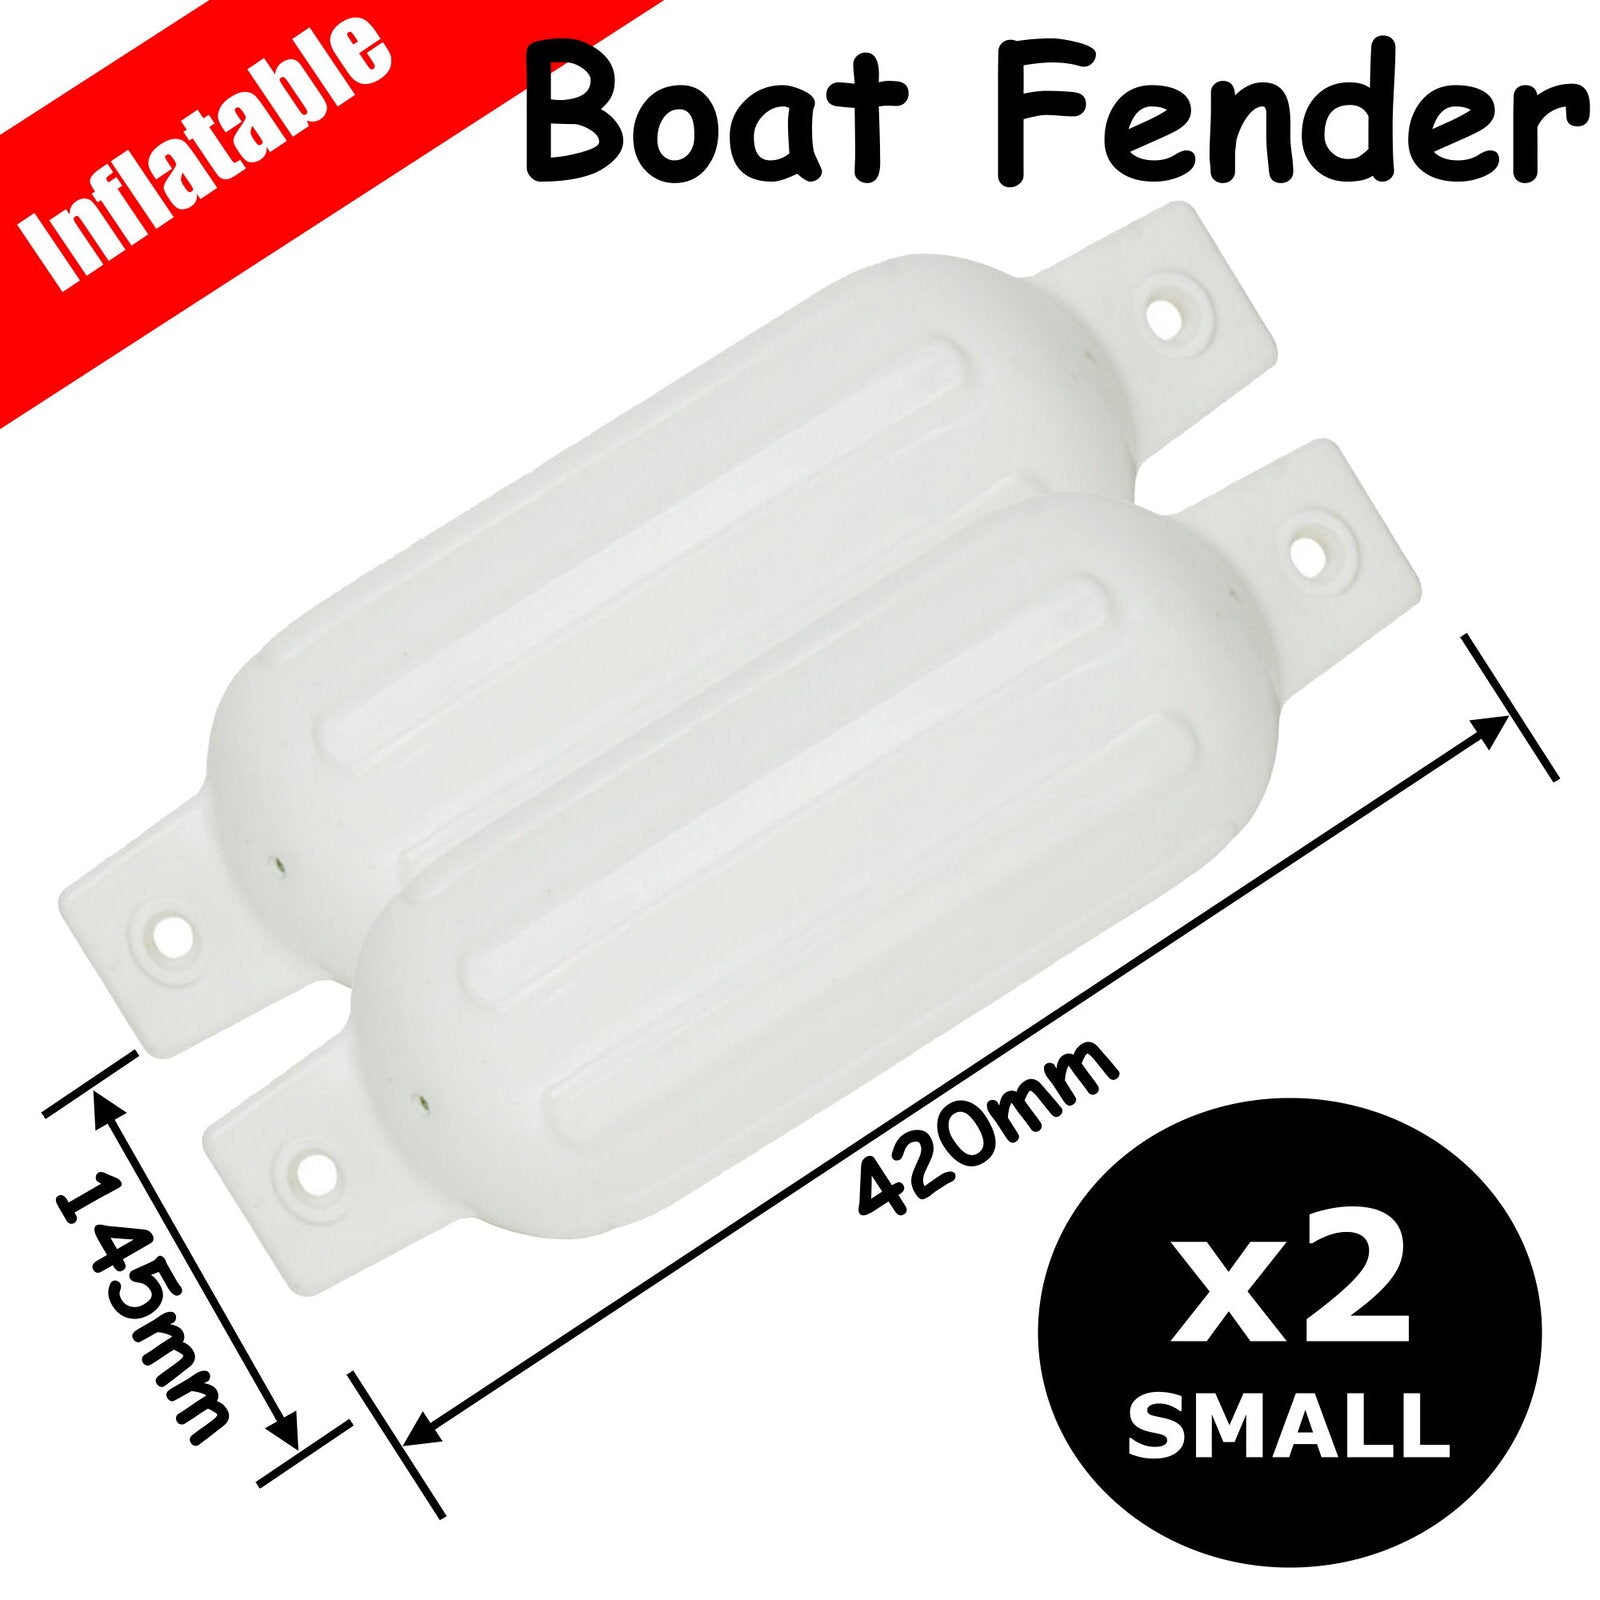 2 x SMALL Boat Fender 420x145mm Inflatable Marine Dock Buffer Twin Eye Ribbed White